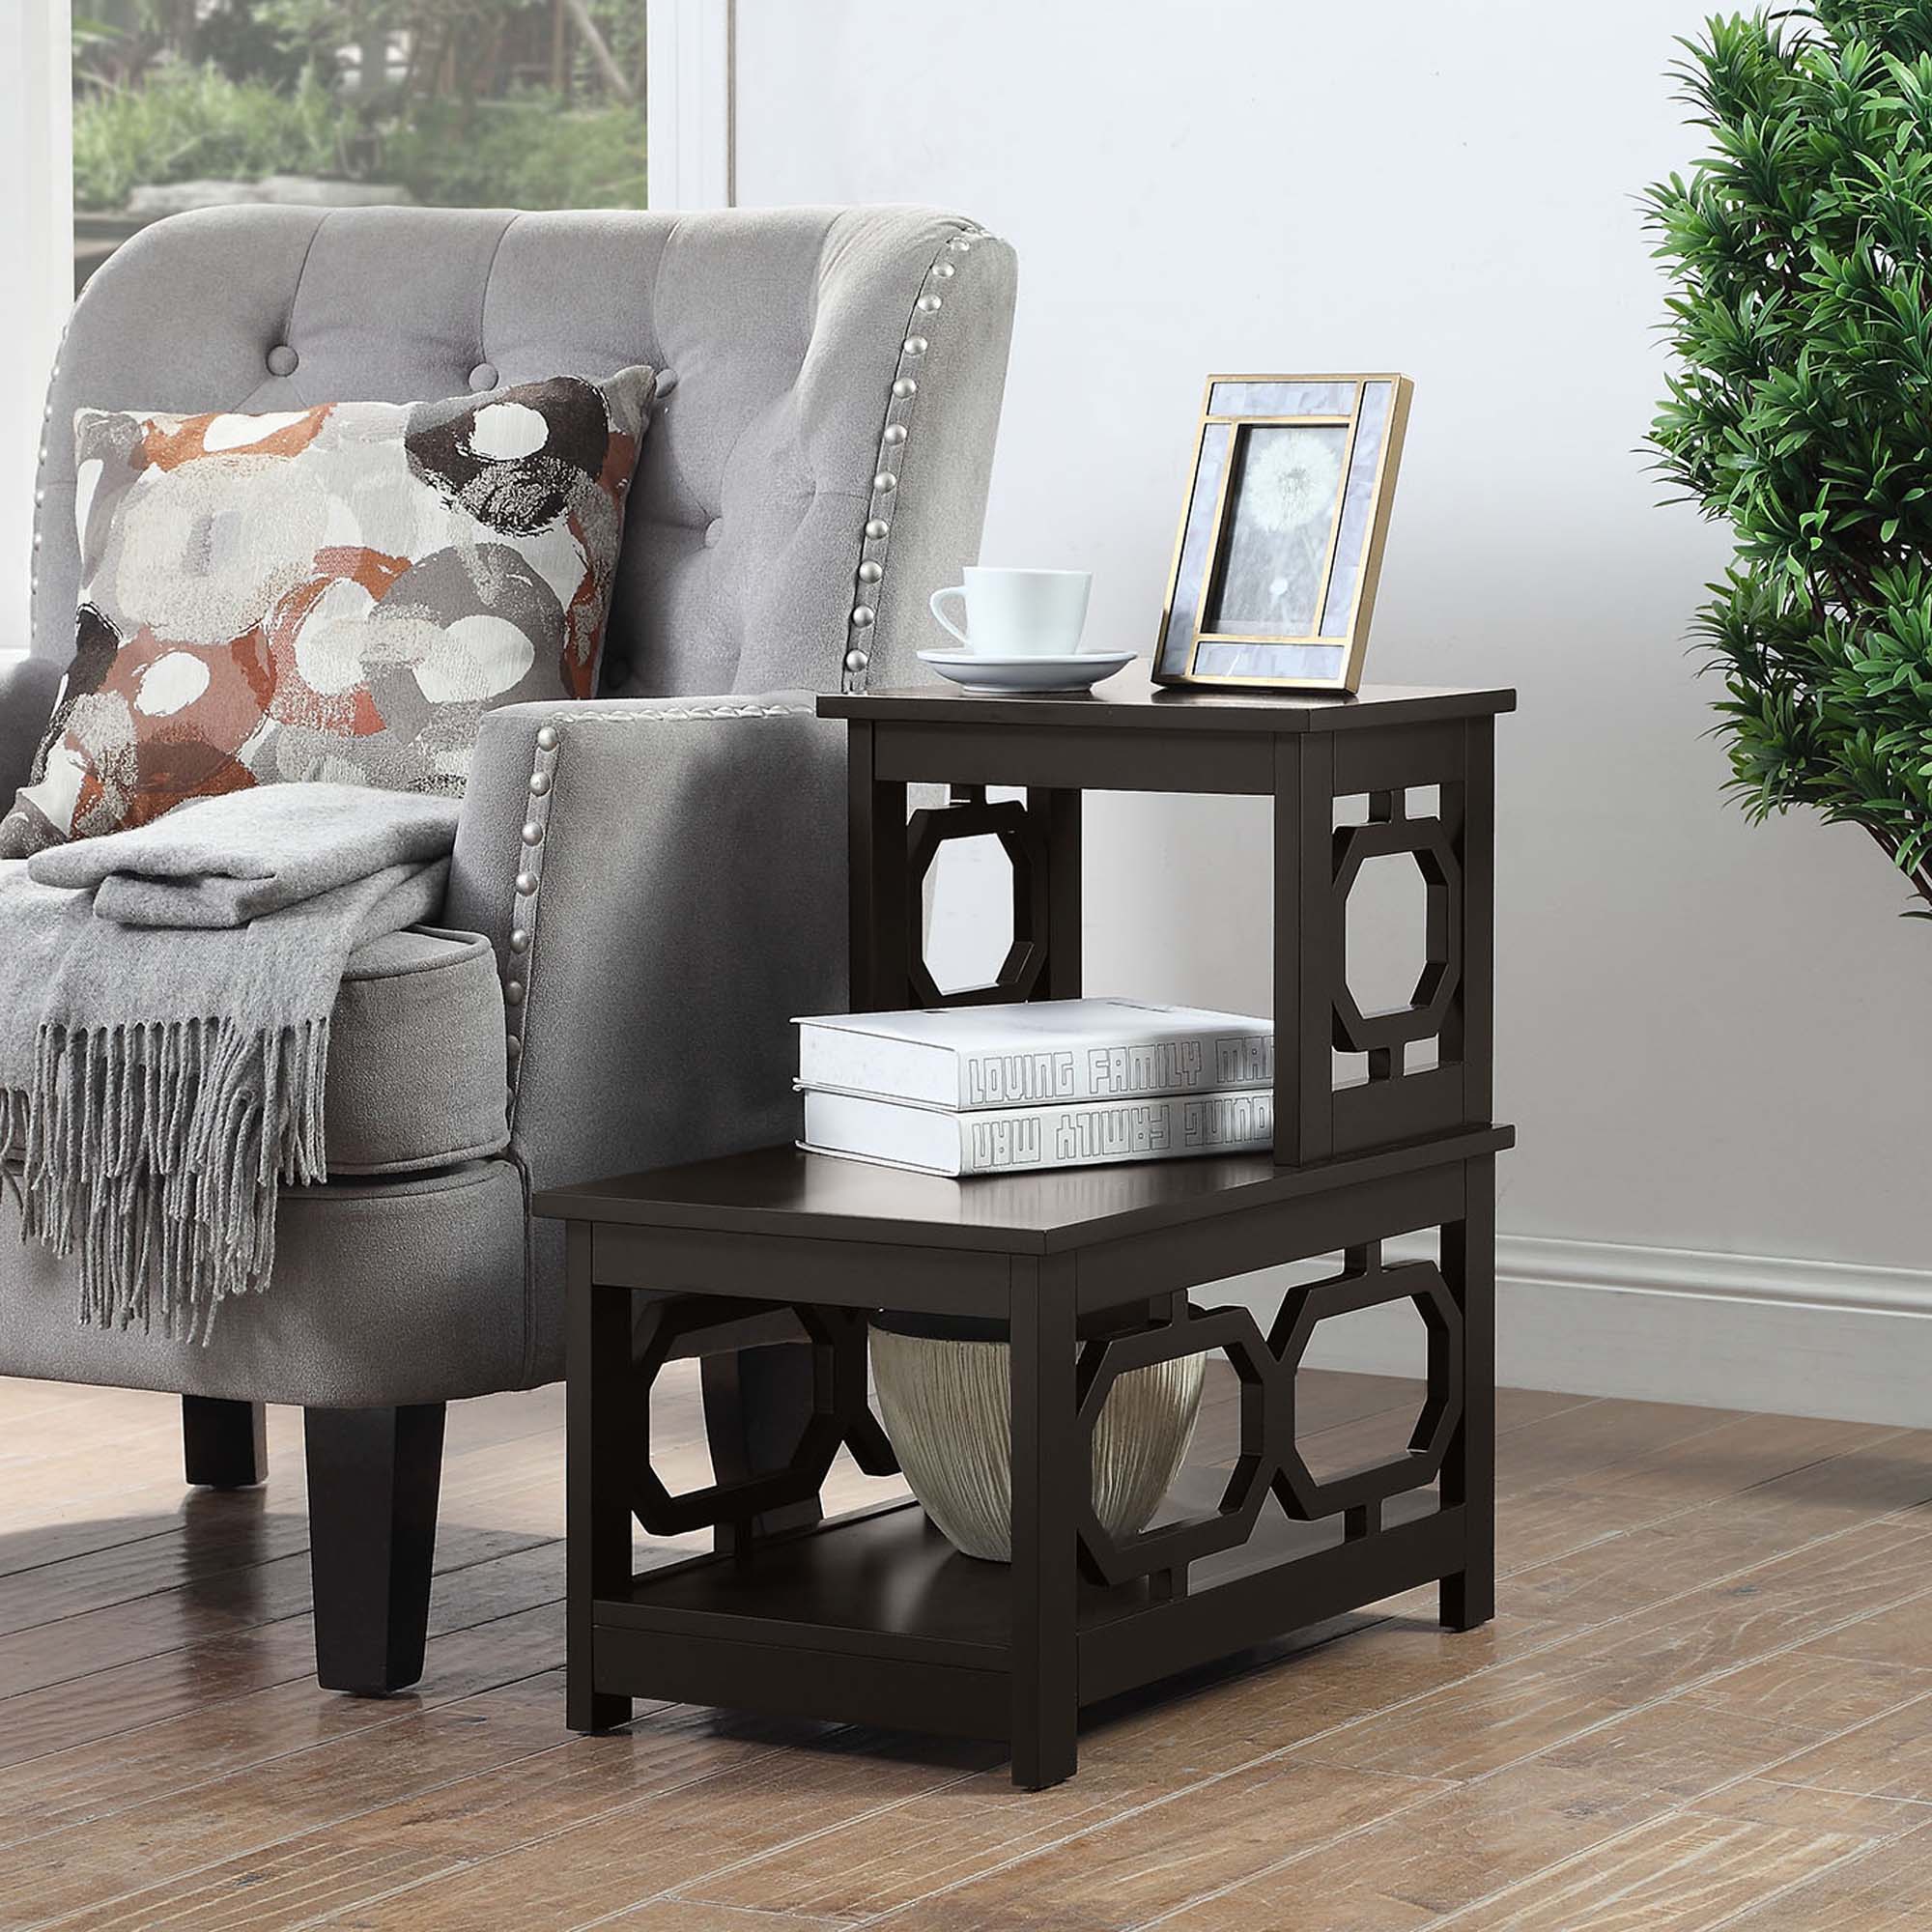 Convenience Concepts Omega 2 Step Chairside End Table, Multiple Finishes - image 1 of 3